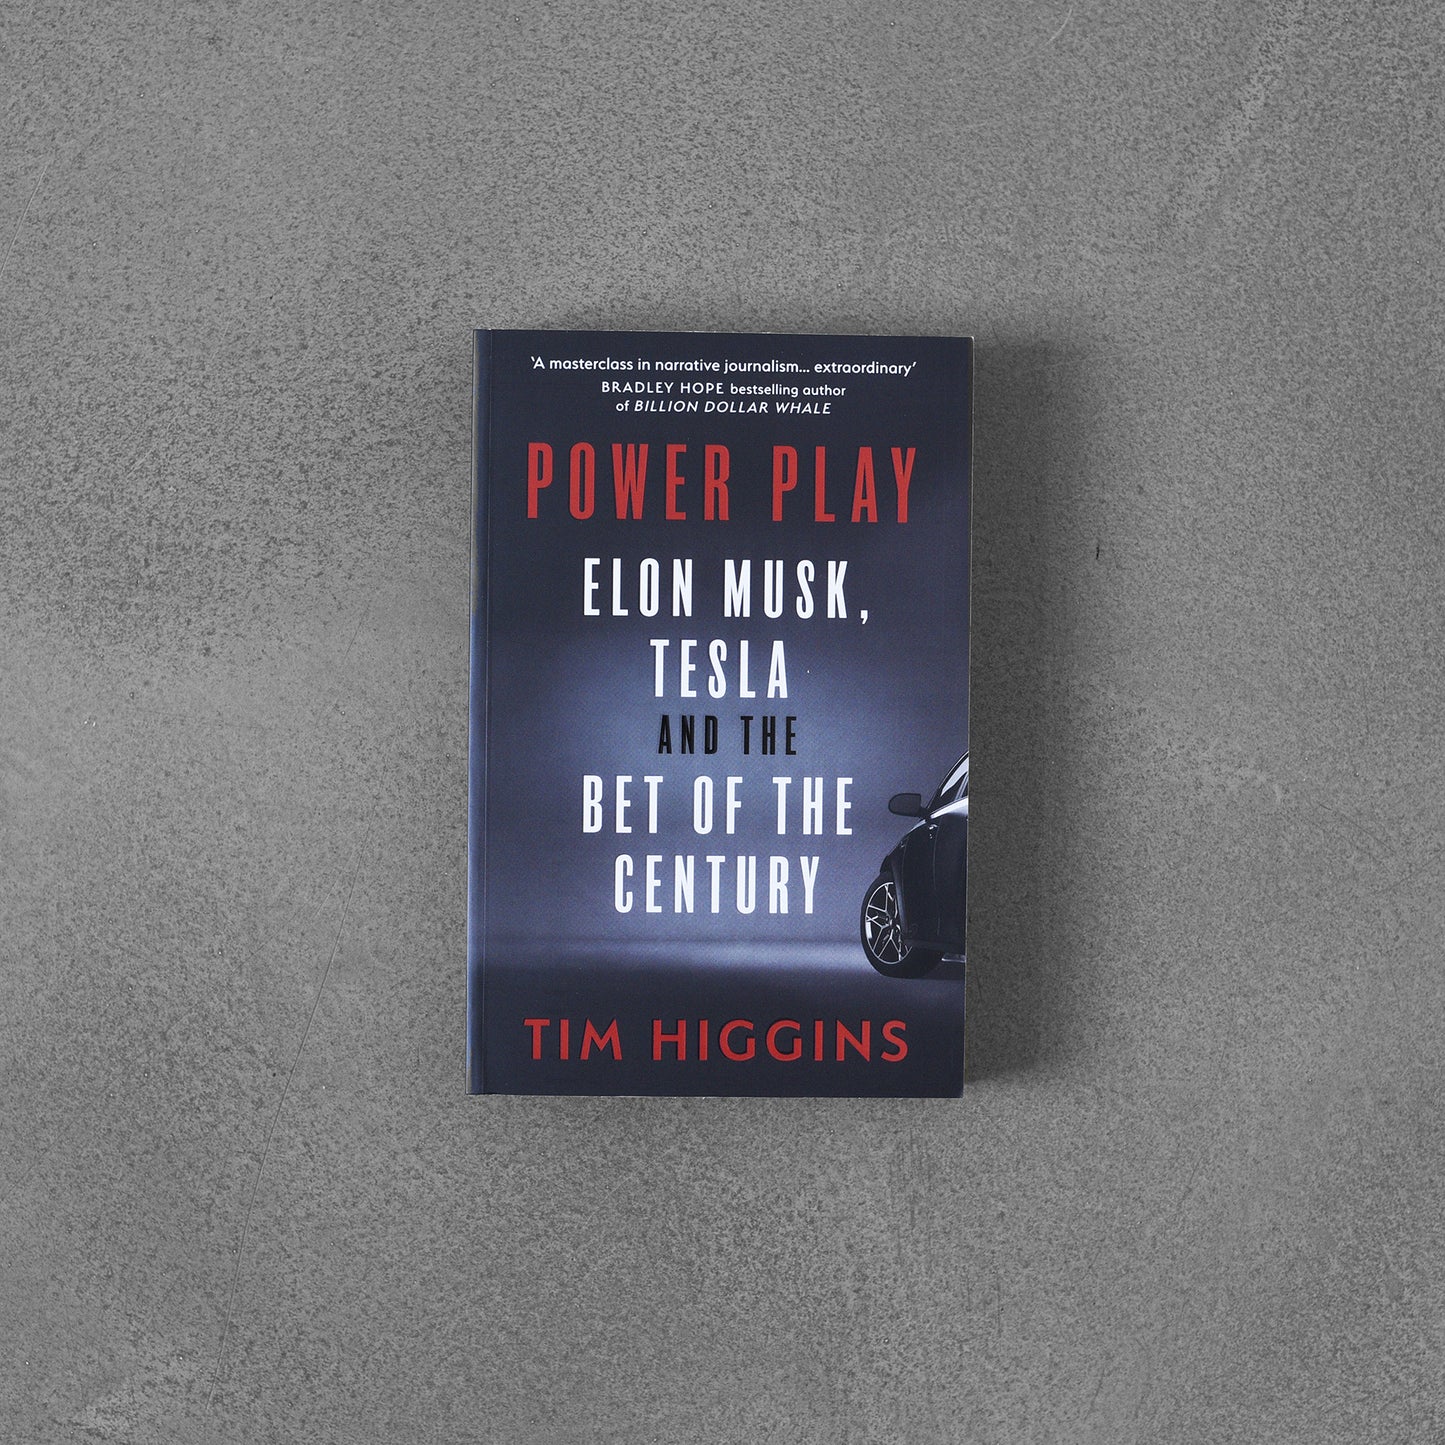 Power Play : Elon Musk, Tesla, and the Bet of the Century, Tim Higgons TPB